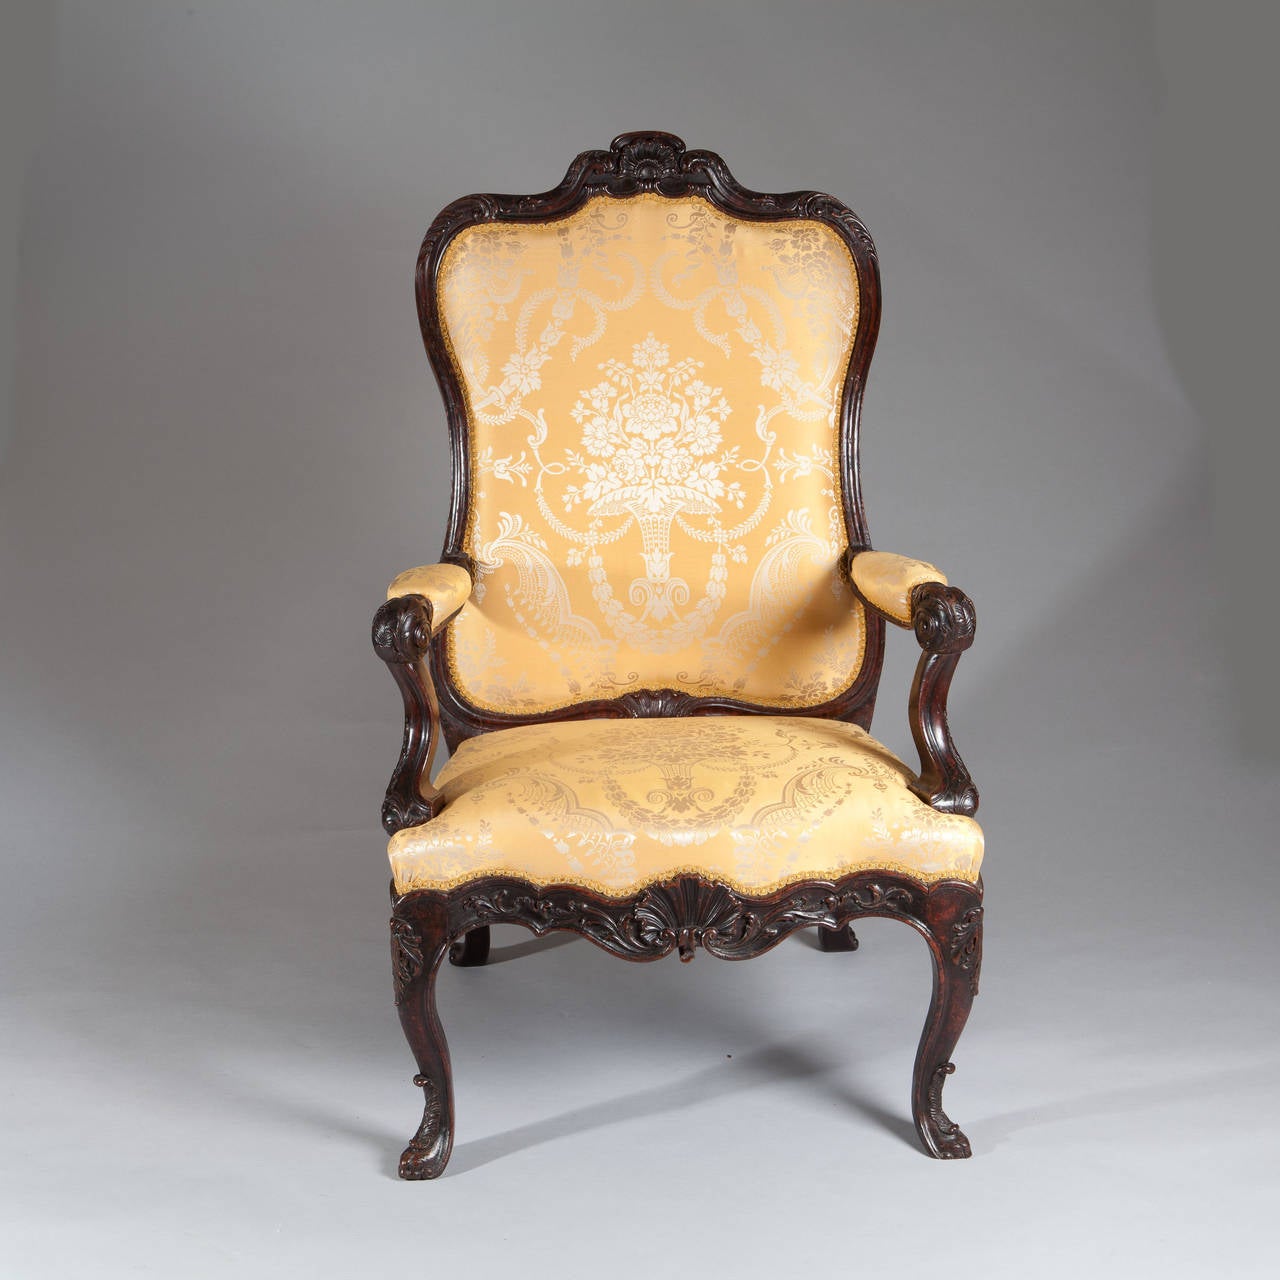 A fine 18th century large-scale armchair, boldly carved with Rococo ornament, the shaped top rail with central shell motif leading to outswept arms, the whole raised on cabriole legs the surface with acanthus and foliate carving.